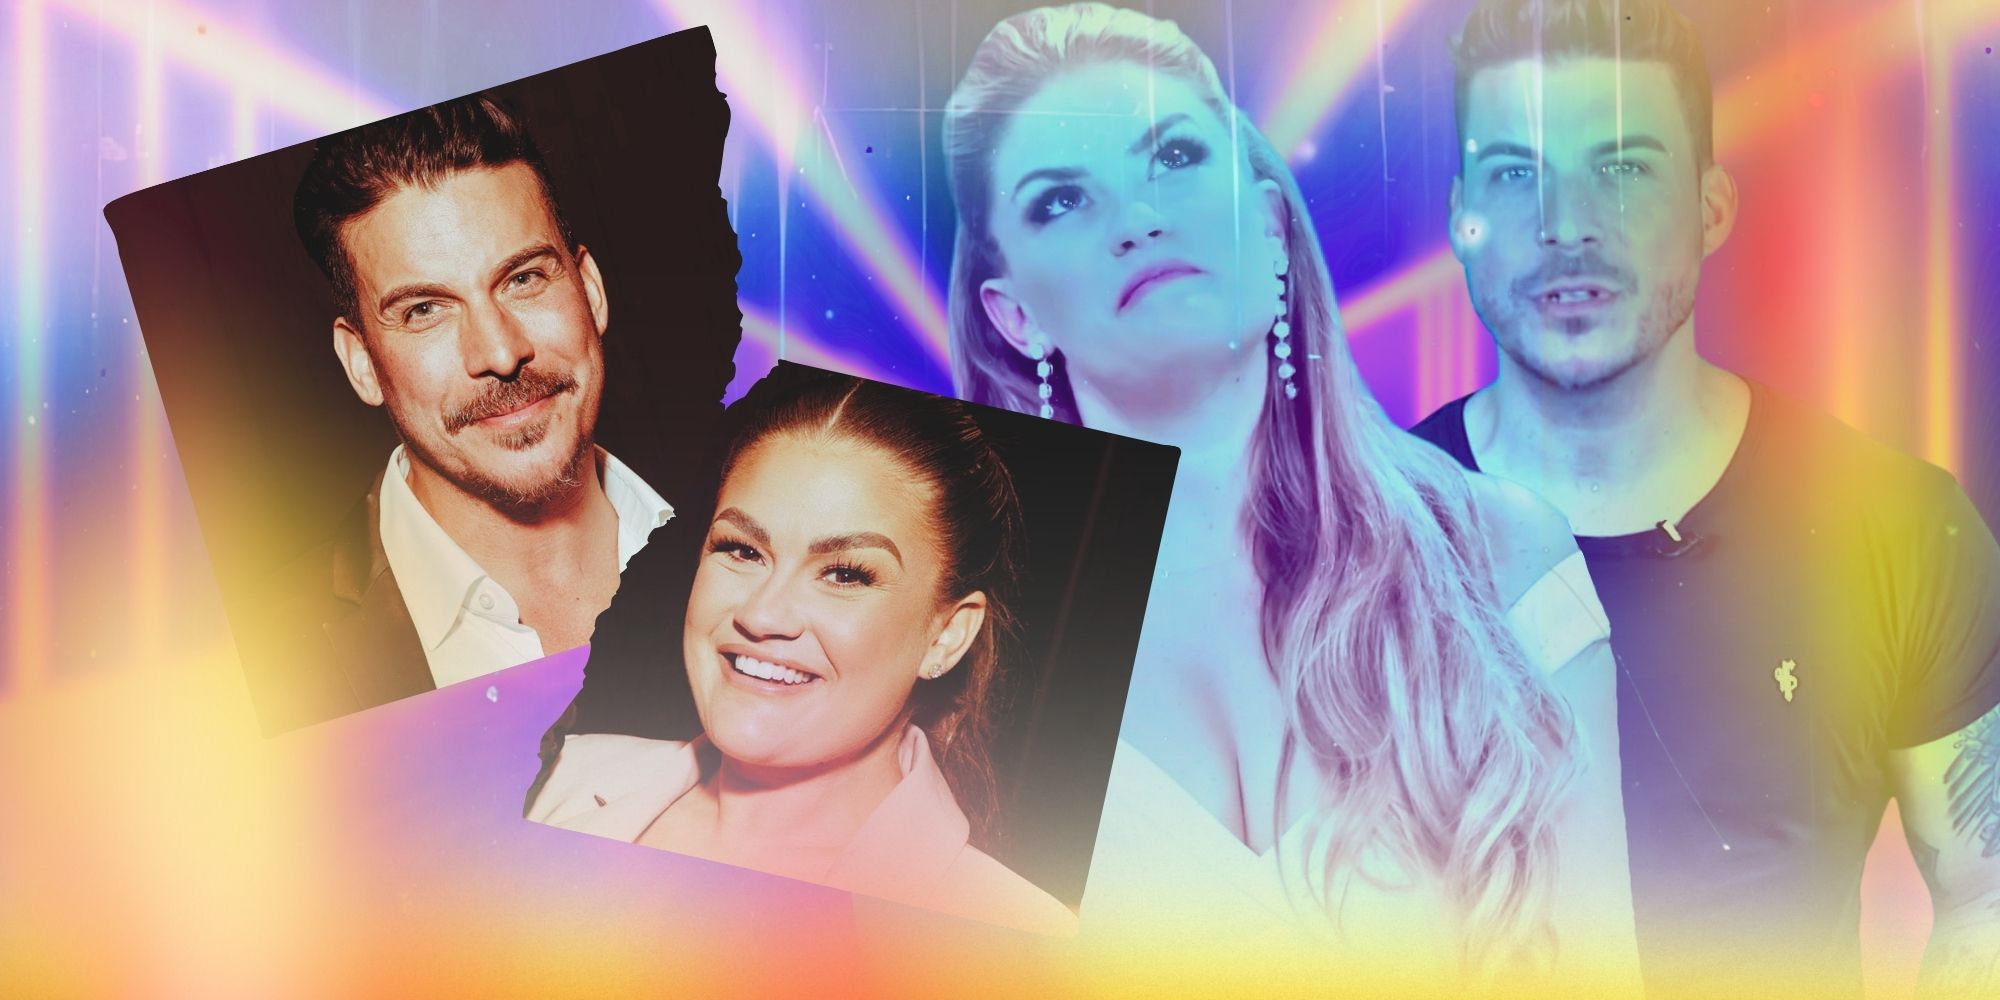 Montage of Vanderpump Rules' Jax Taylor & Brittany Cartwright smiling and looking serious